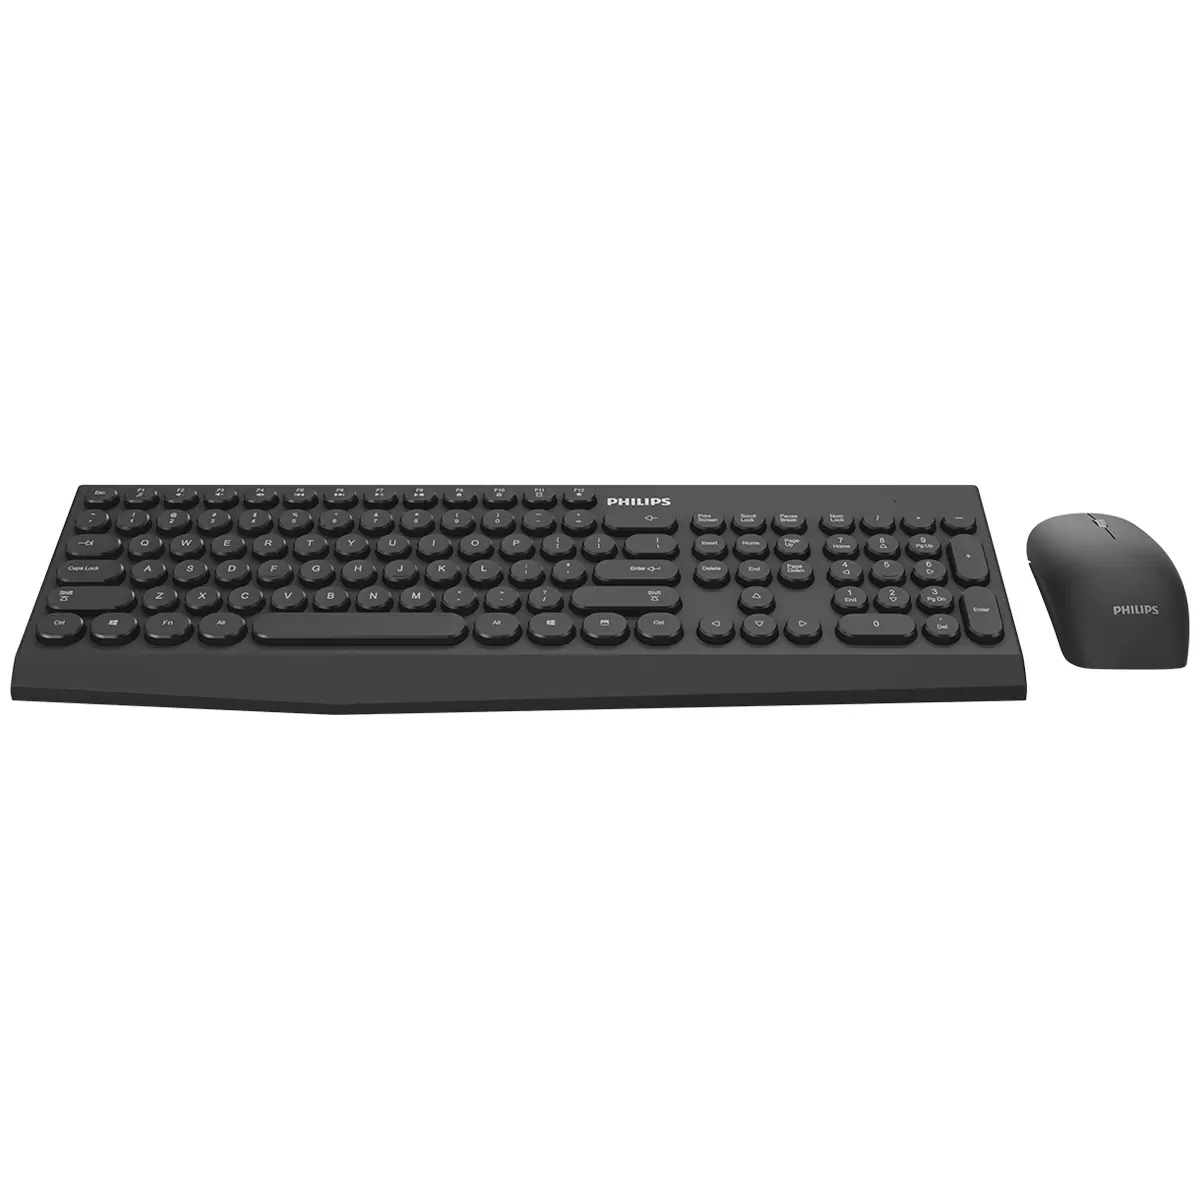 Philips Wireless Keyboard and Mouse with Webcam Bundle SPT6323 and CP11-AF200V